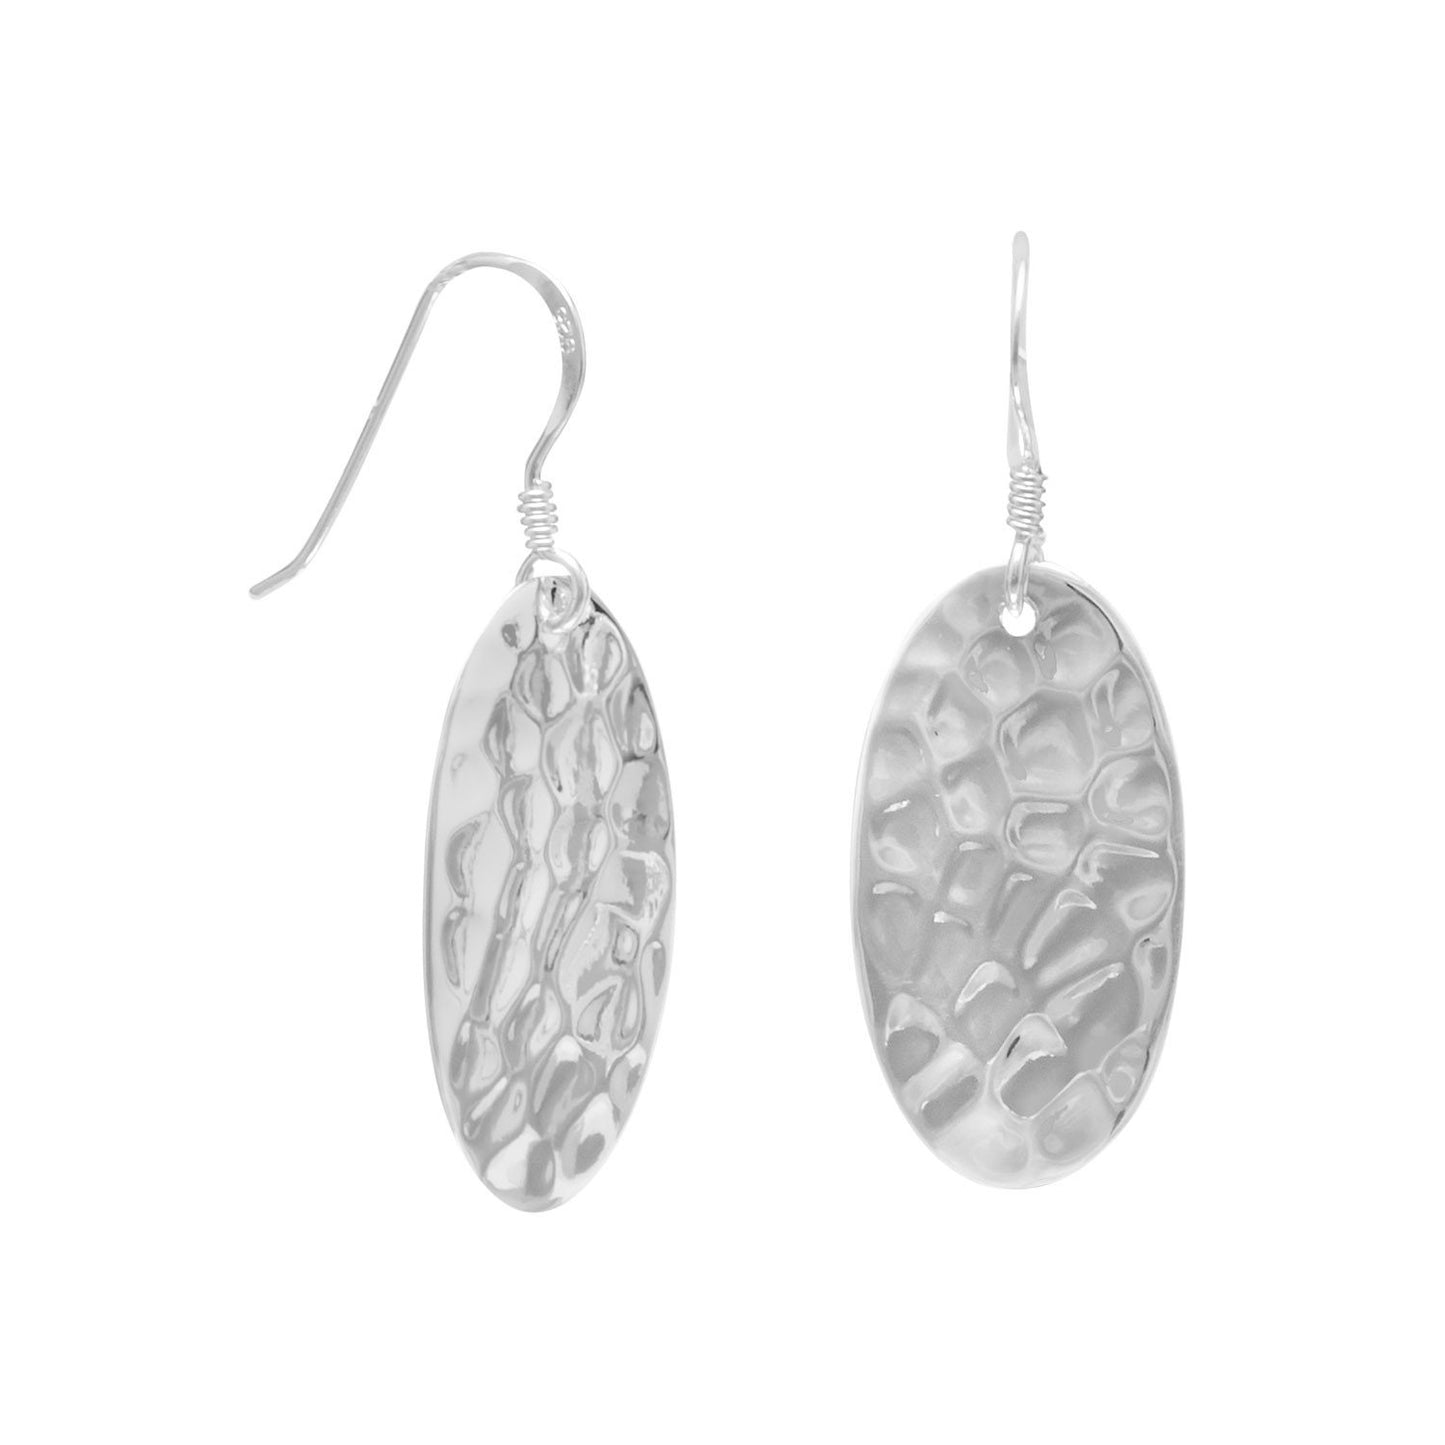 Small Oval Hammered French Wire Earrings